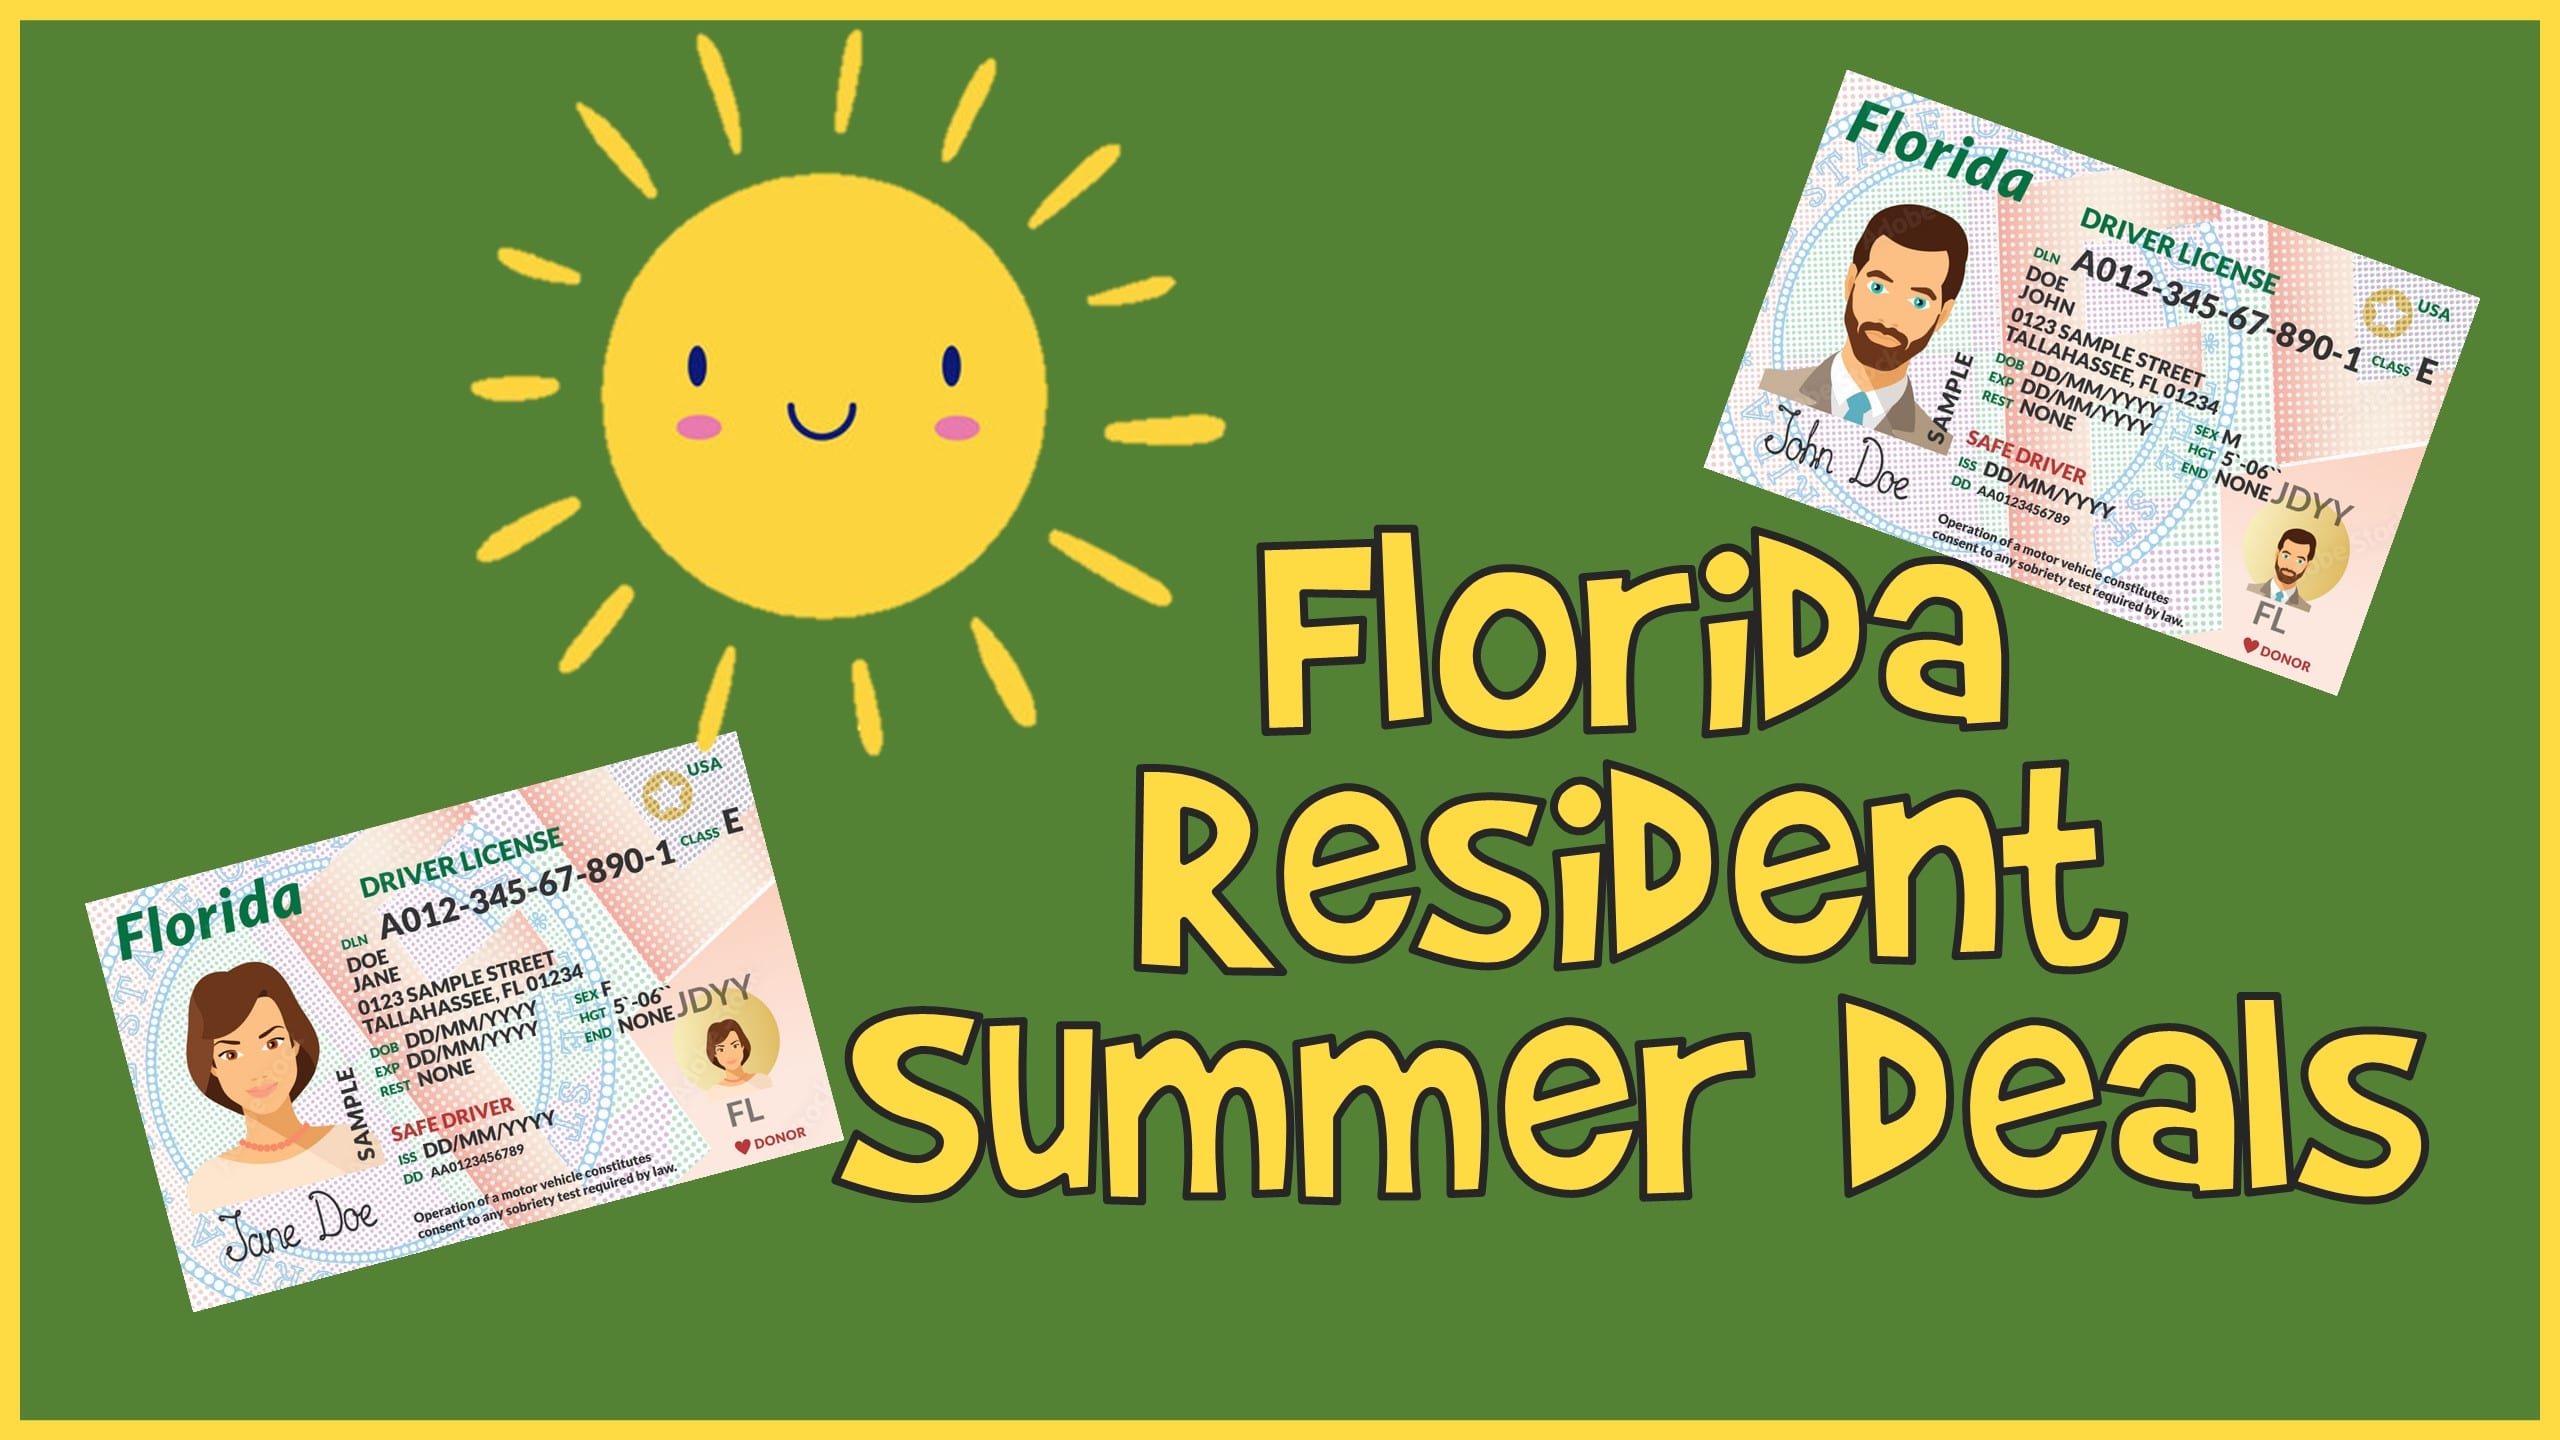 Florida Resident Summer Savings on Attractions and Entertainment